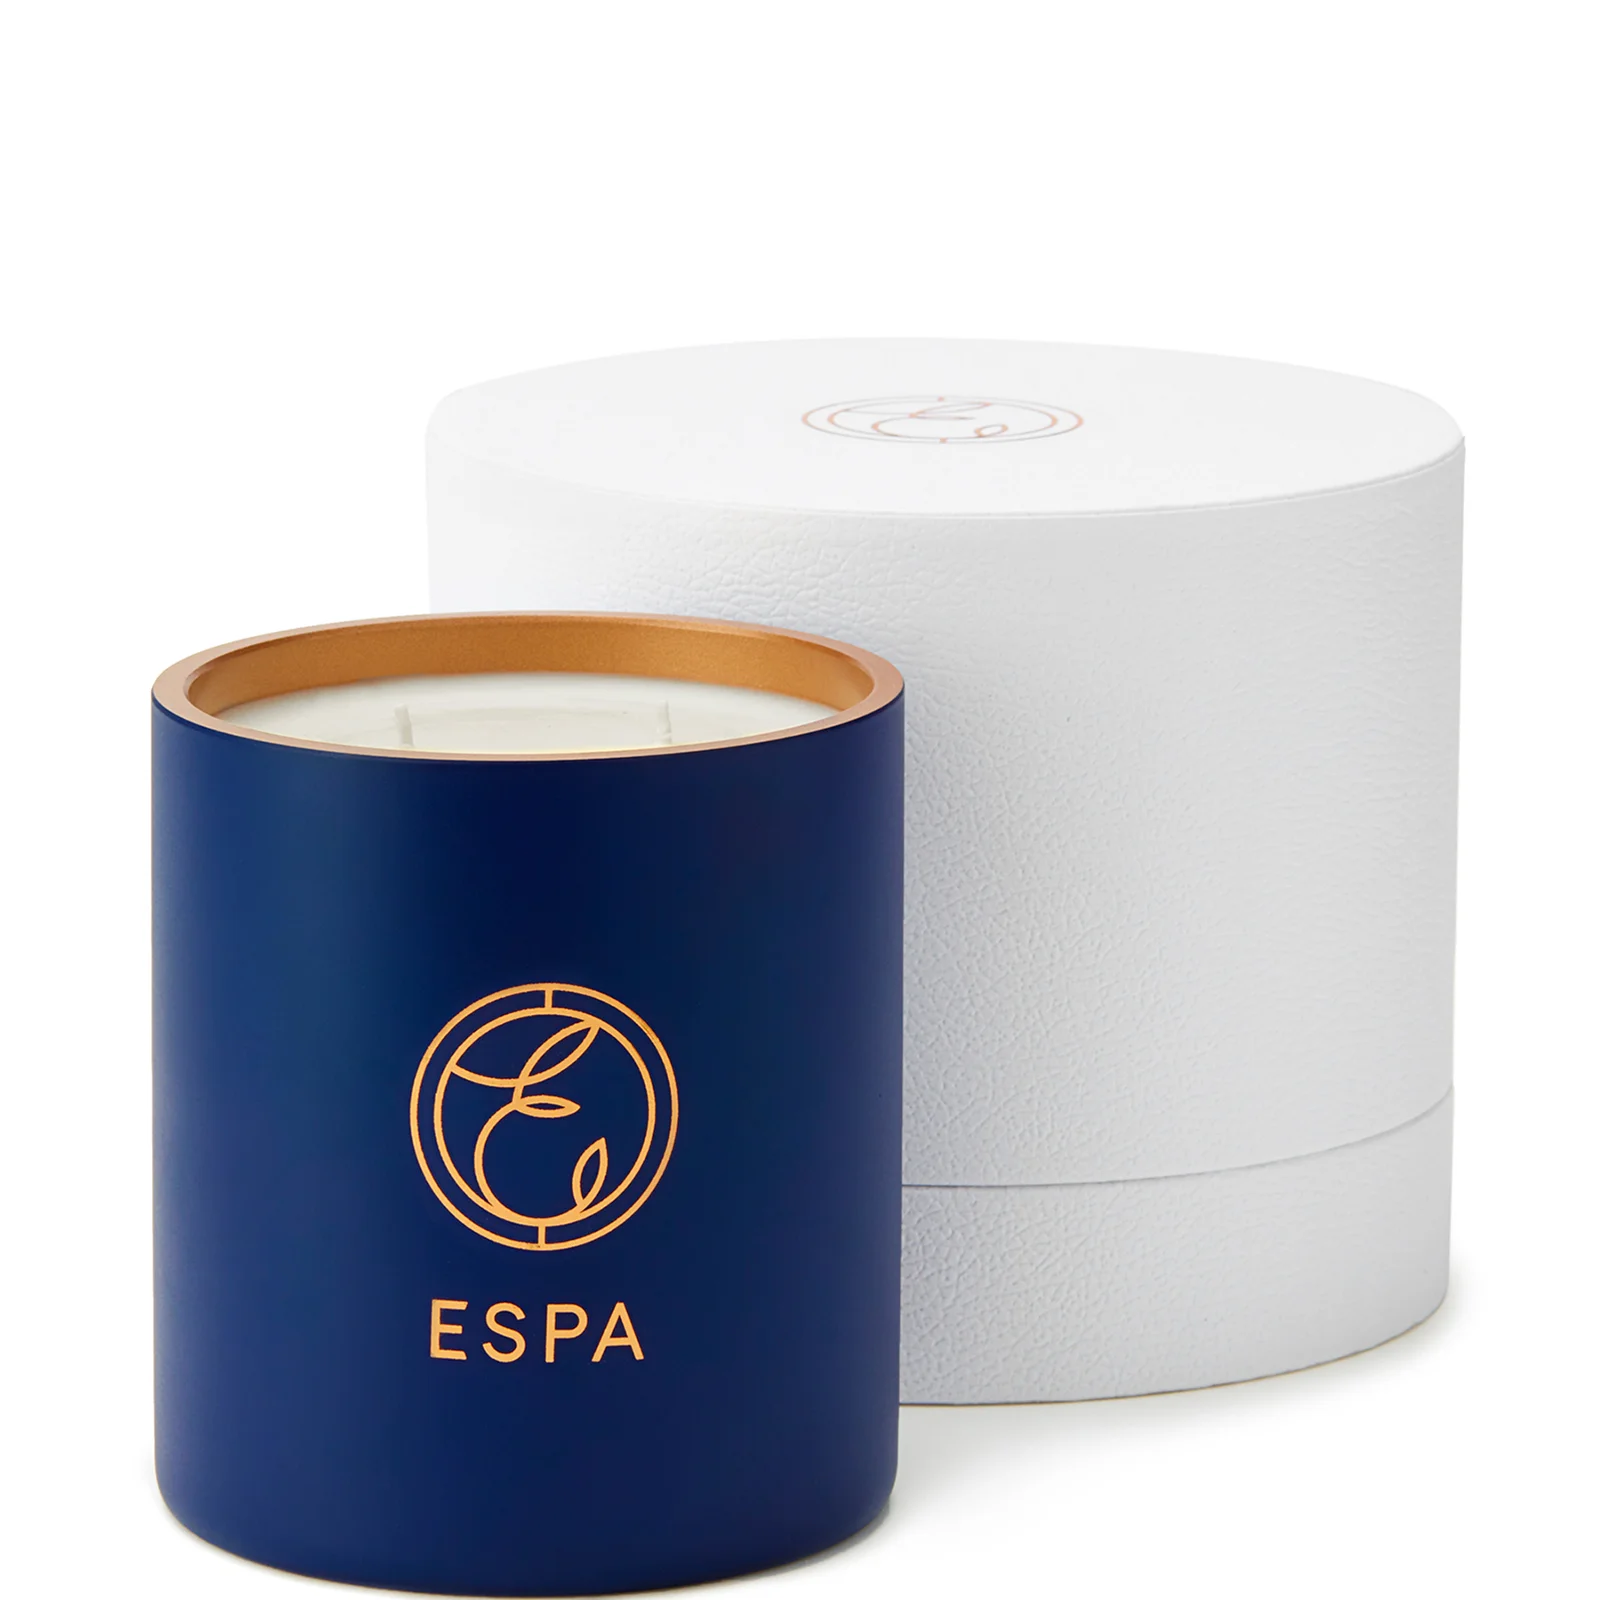 ESPA Frankincense and Myrrh Deluxe Candle 410g Image 1